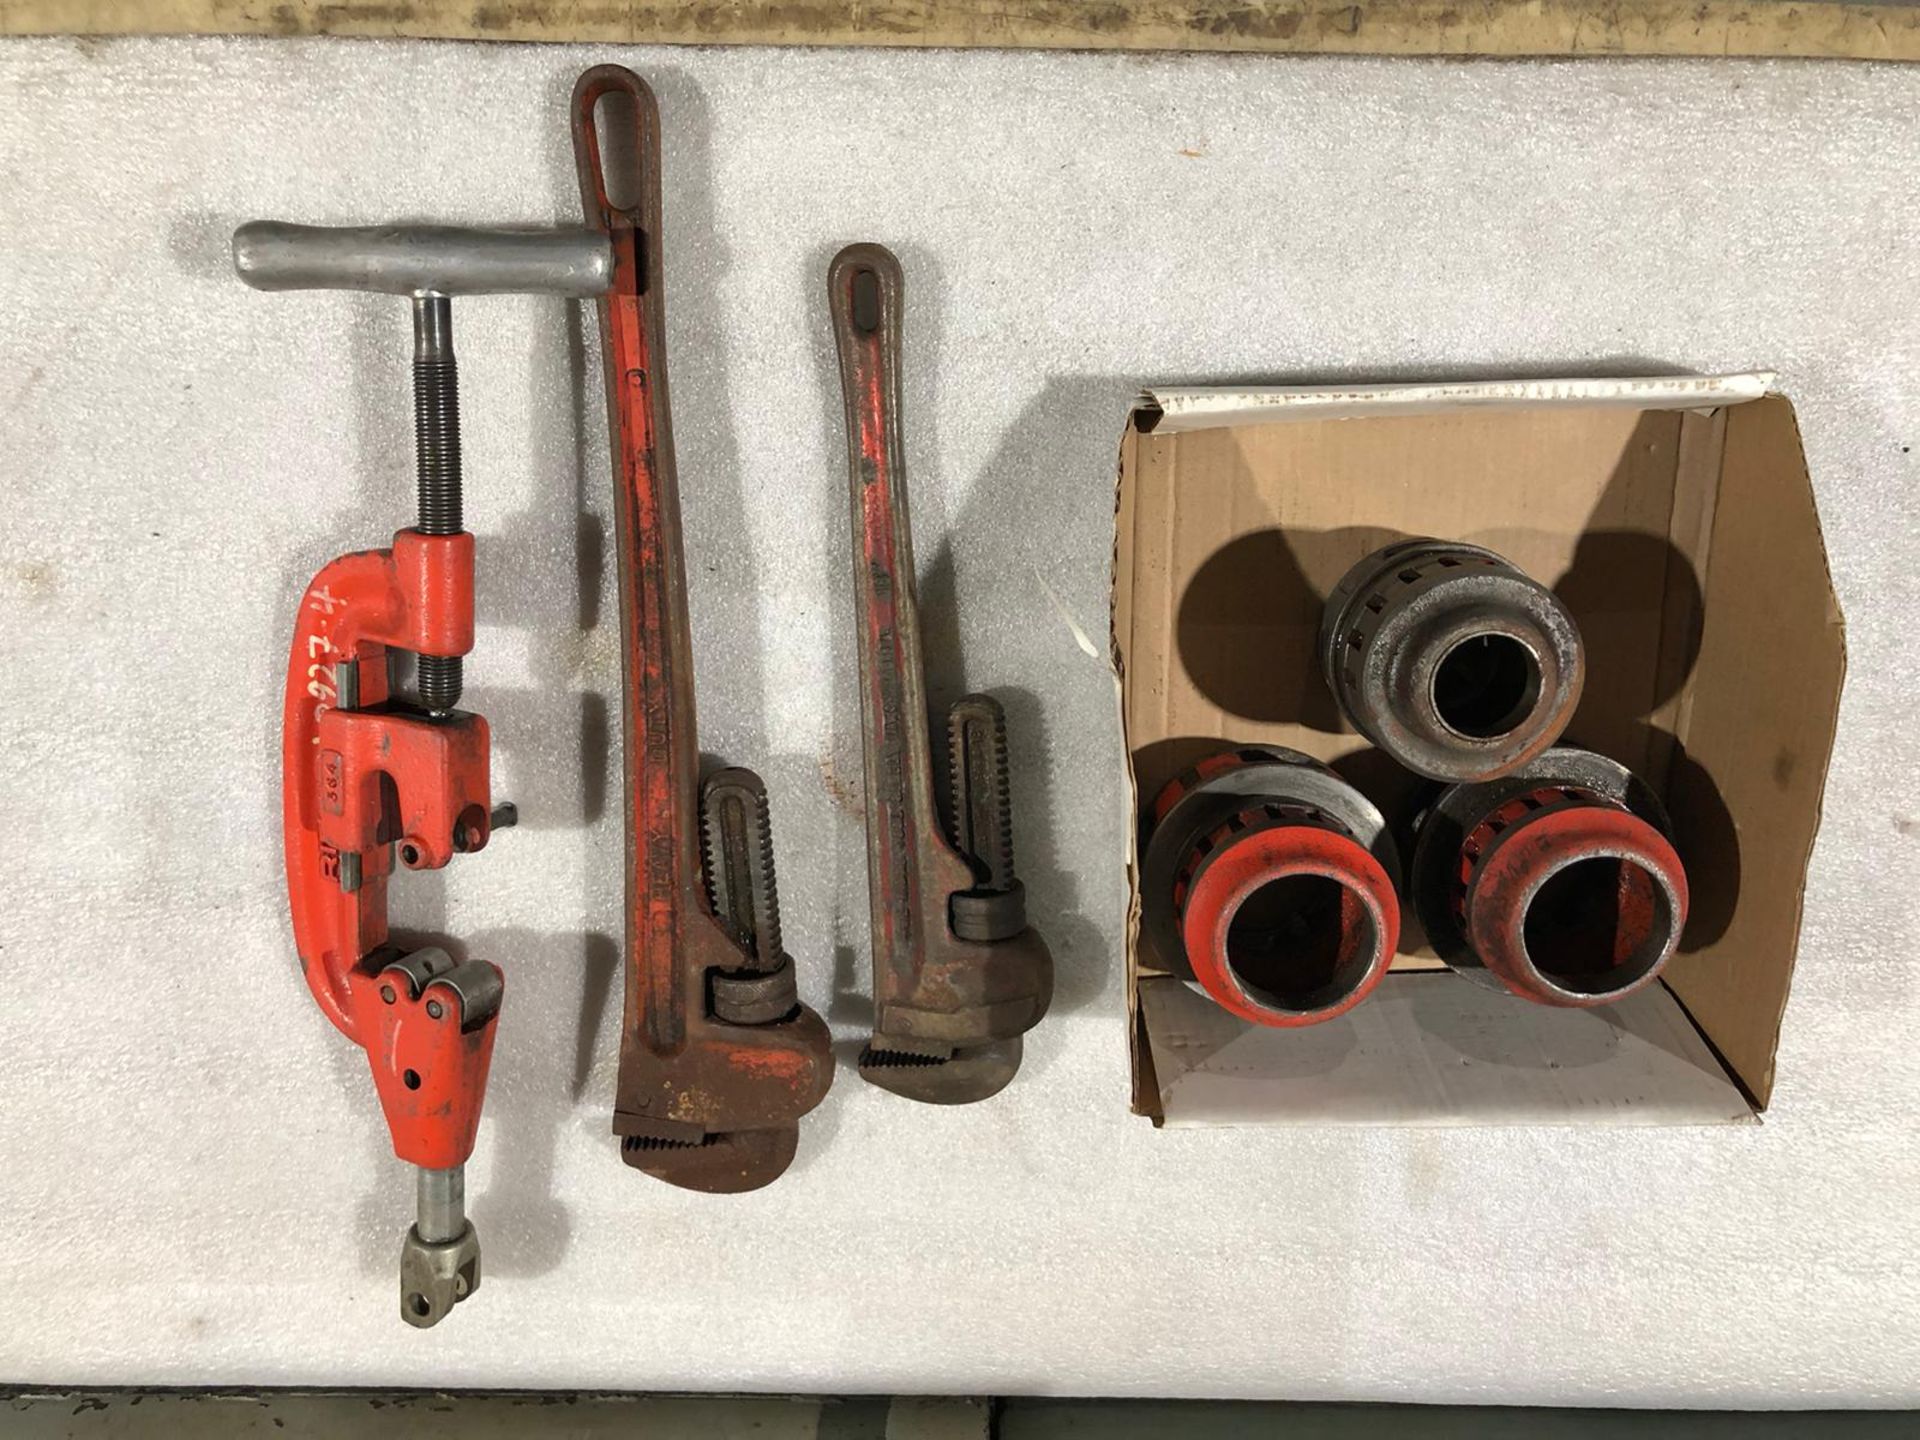 Lot of Ridgid pipe threading dies and wrenches and cutter